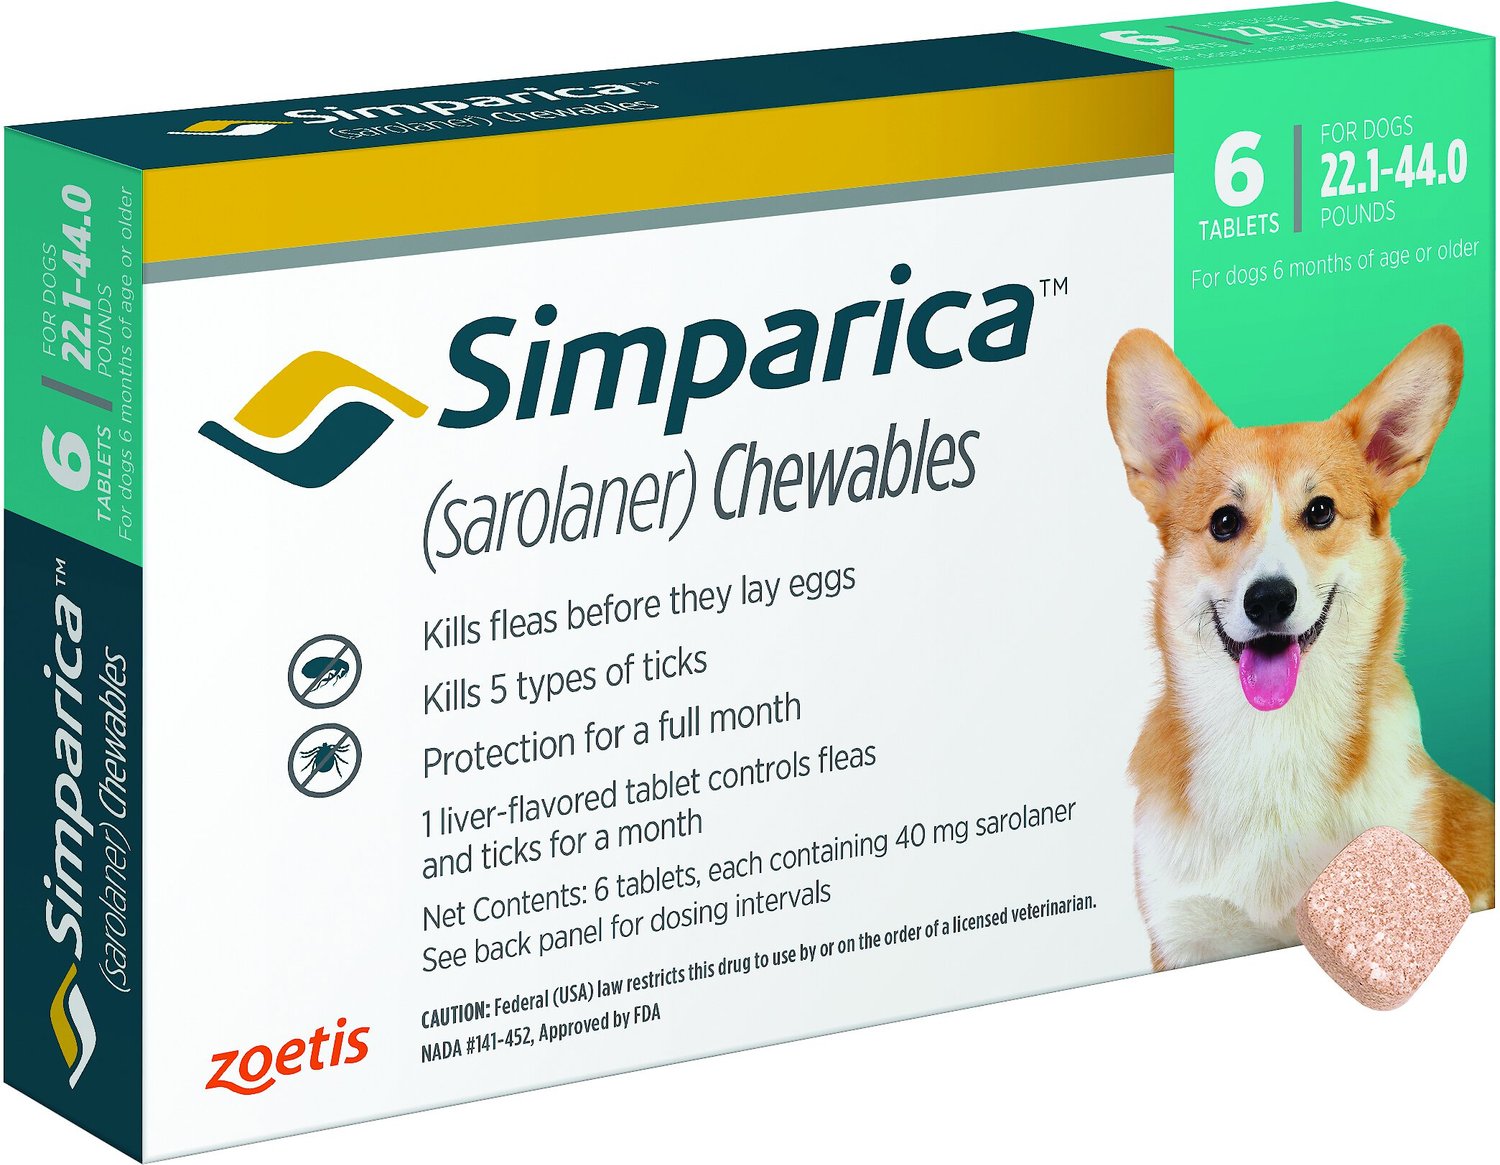 simparica-chewable-tablet-for-dogs-22-1-44-lbs-mint-box-6-chewable